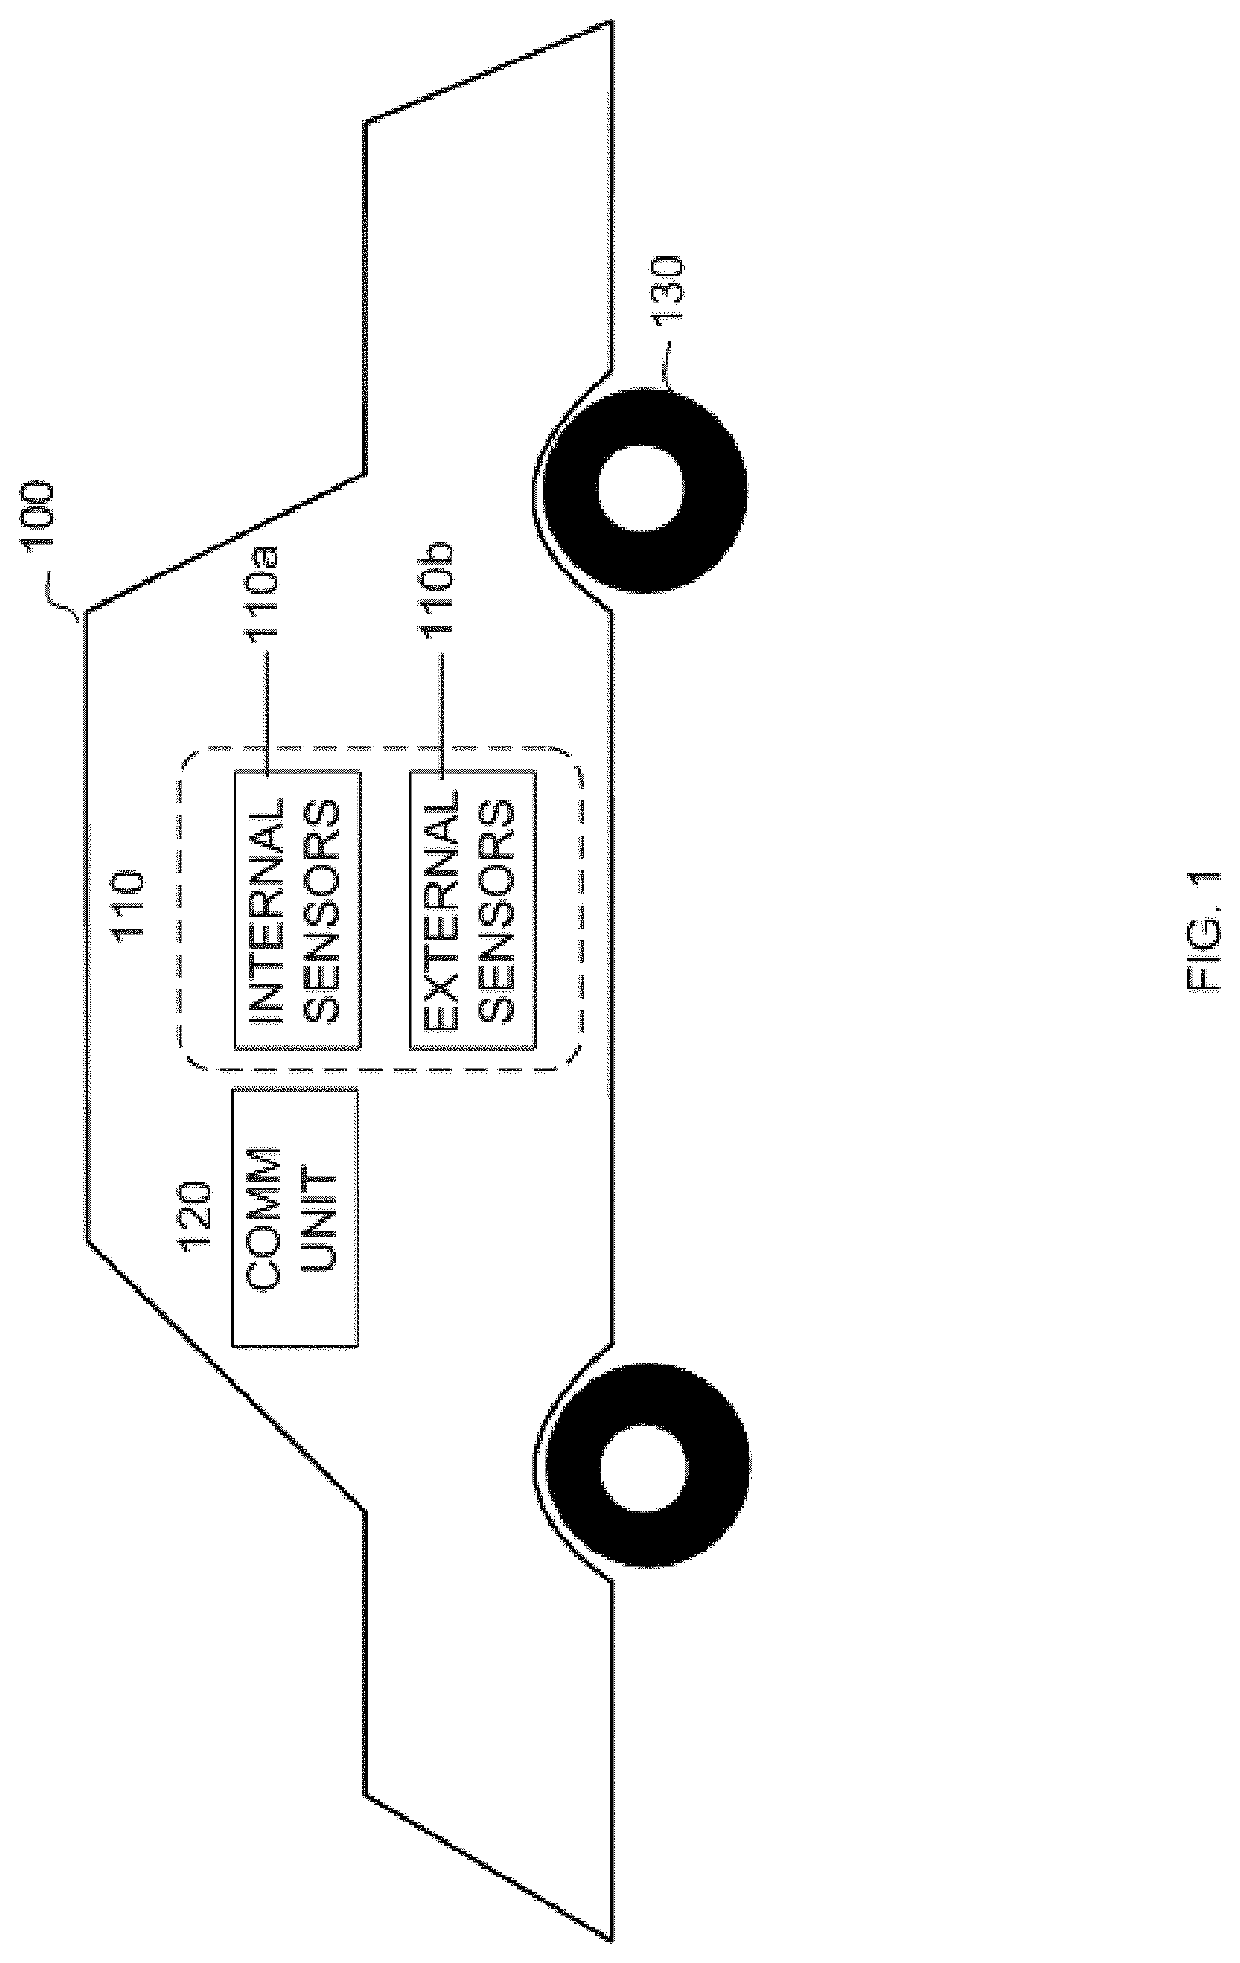 Vehicle behavior monitoring systems and methods